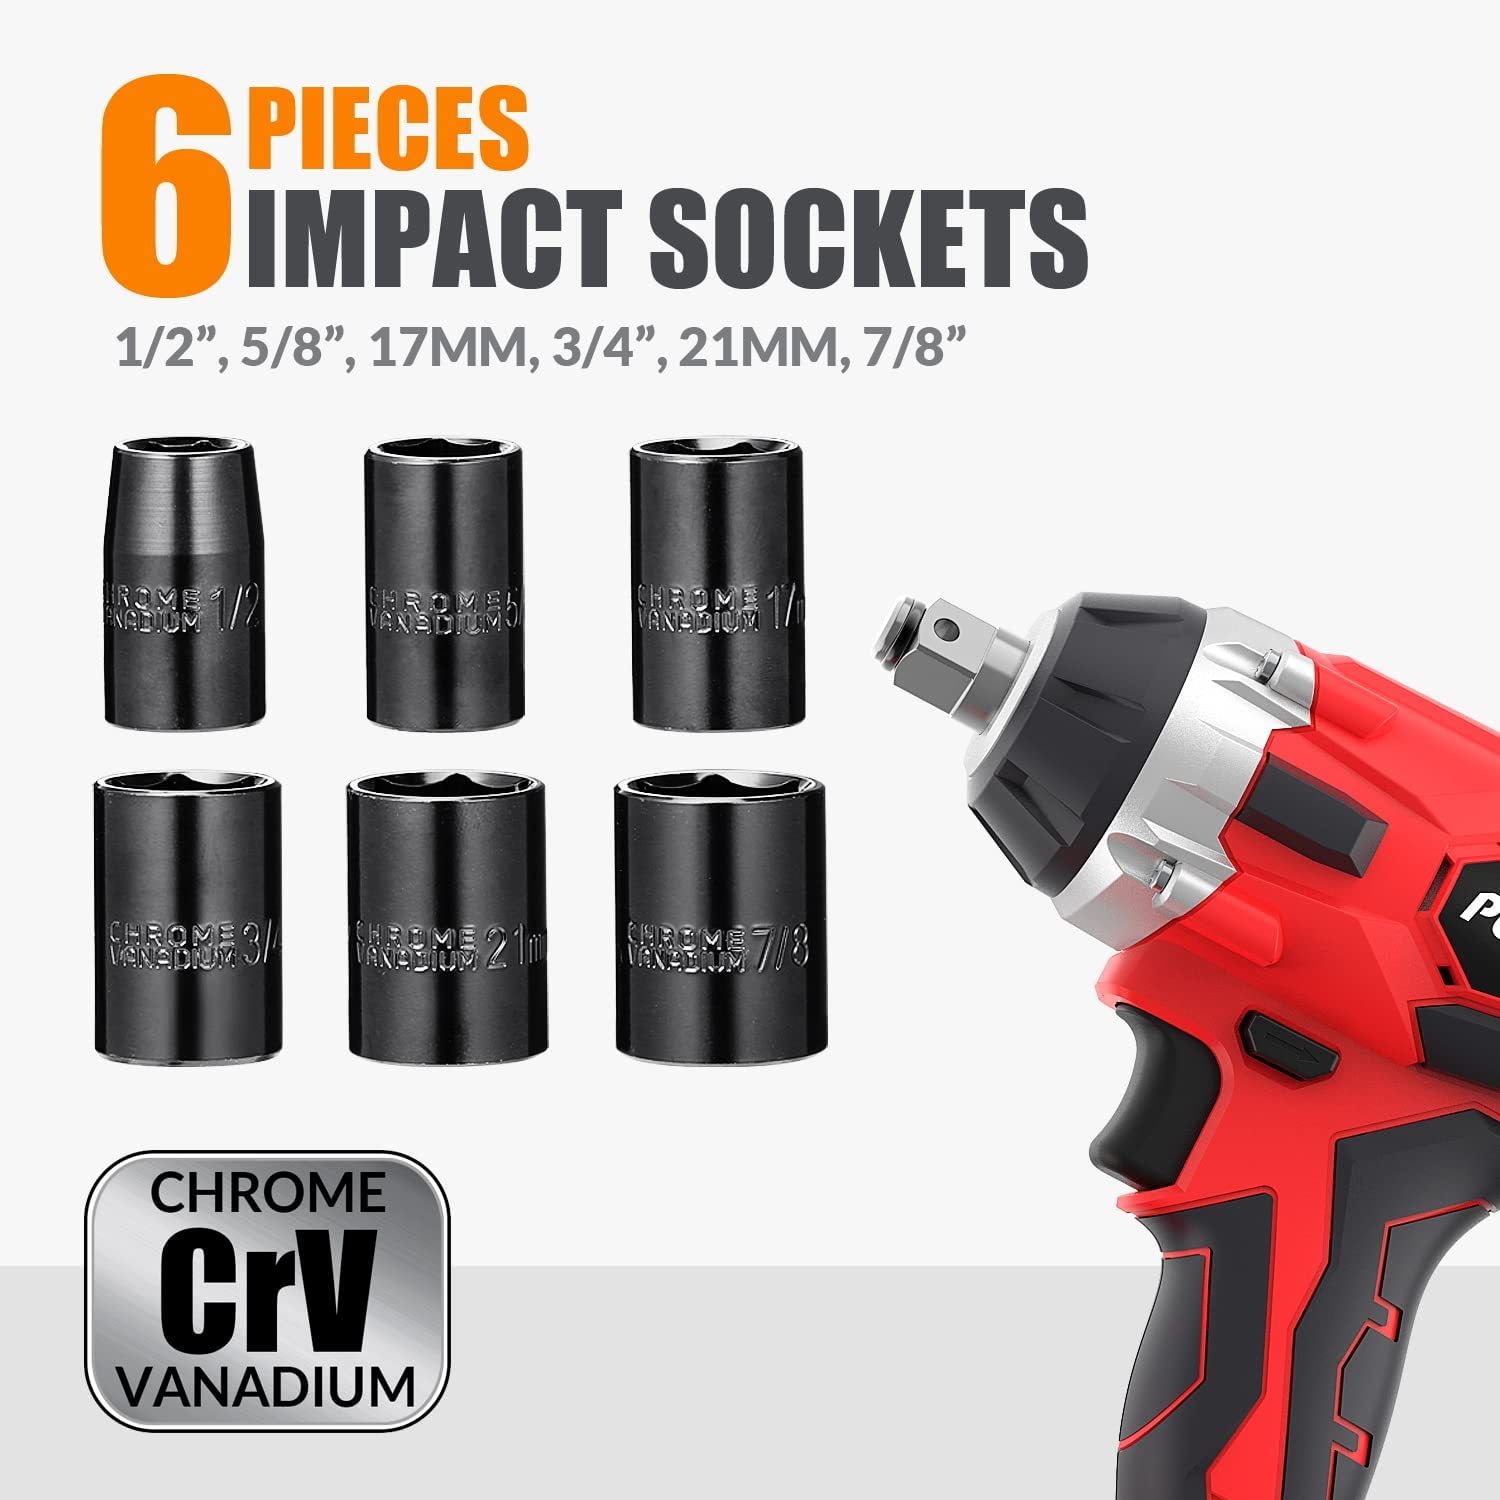 Populo 20V Cordless Impact Wrench, ½” Chuck and similar items